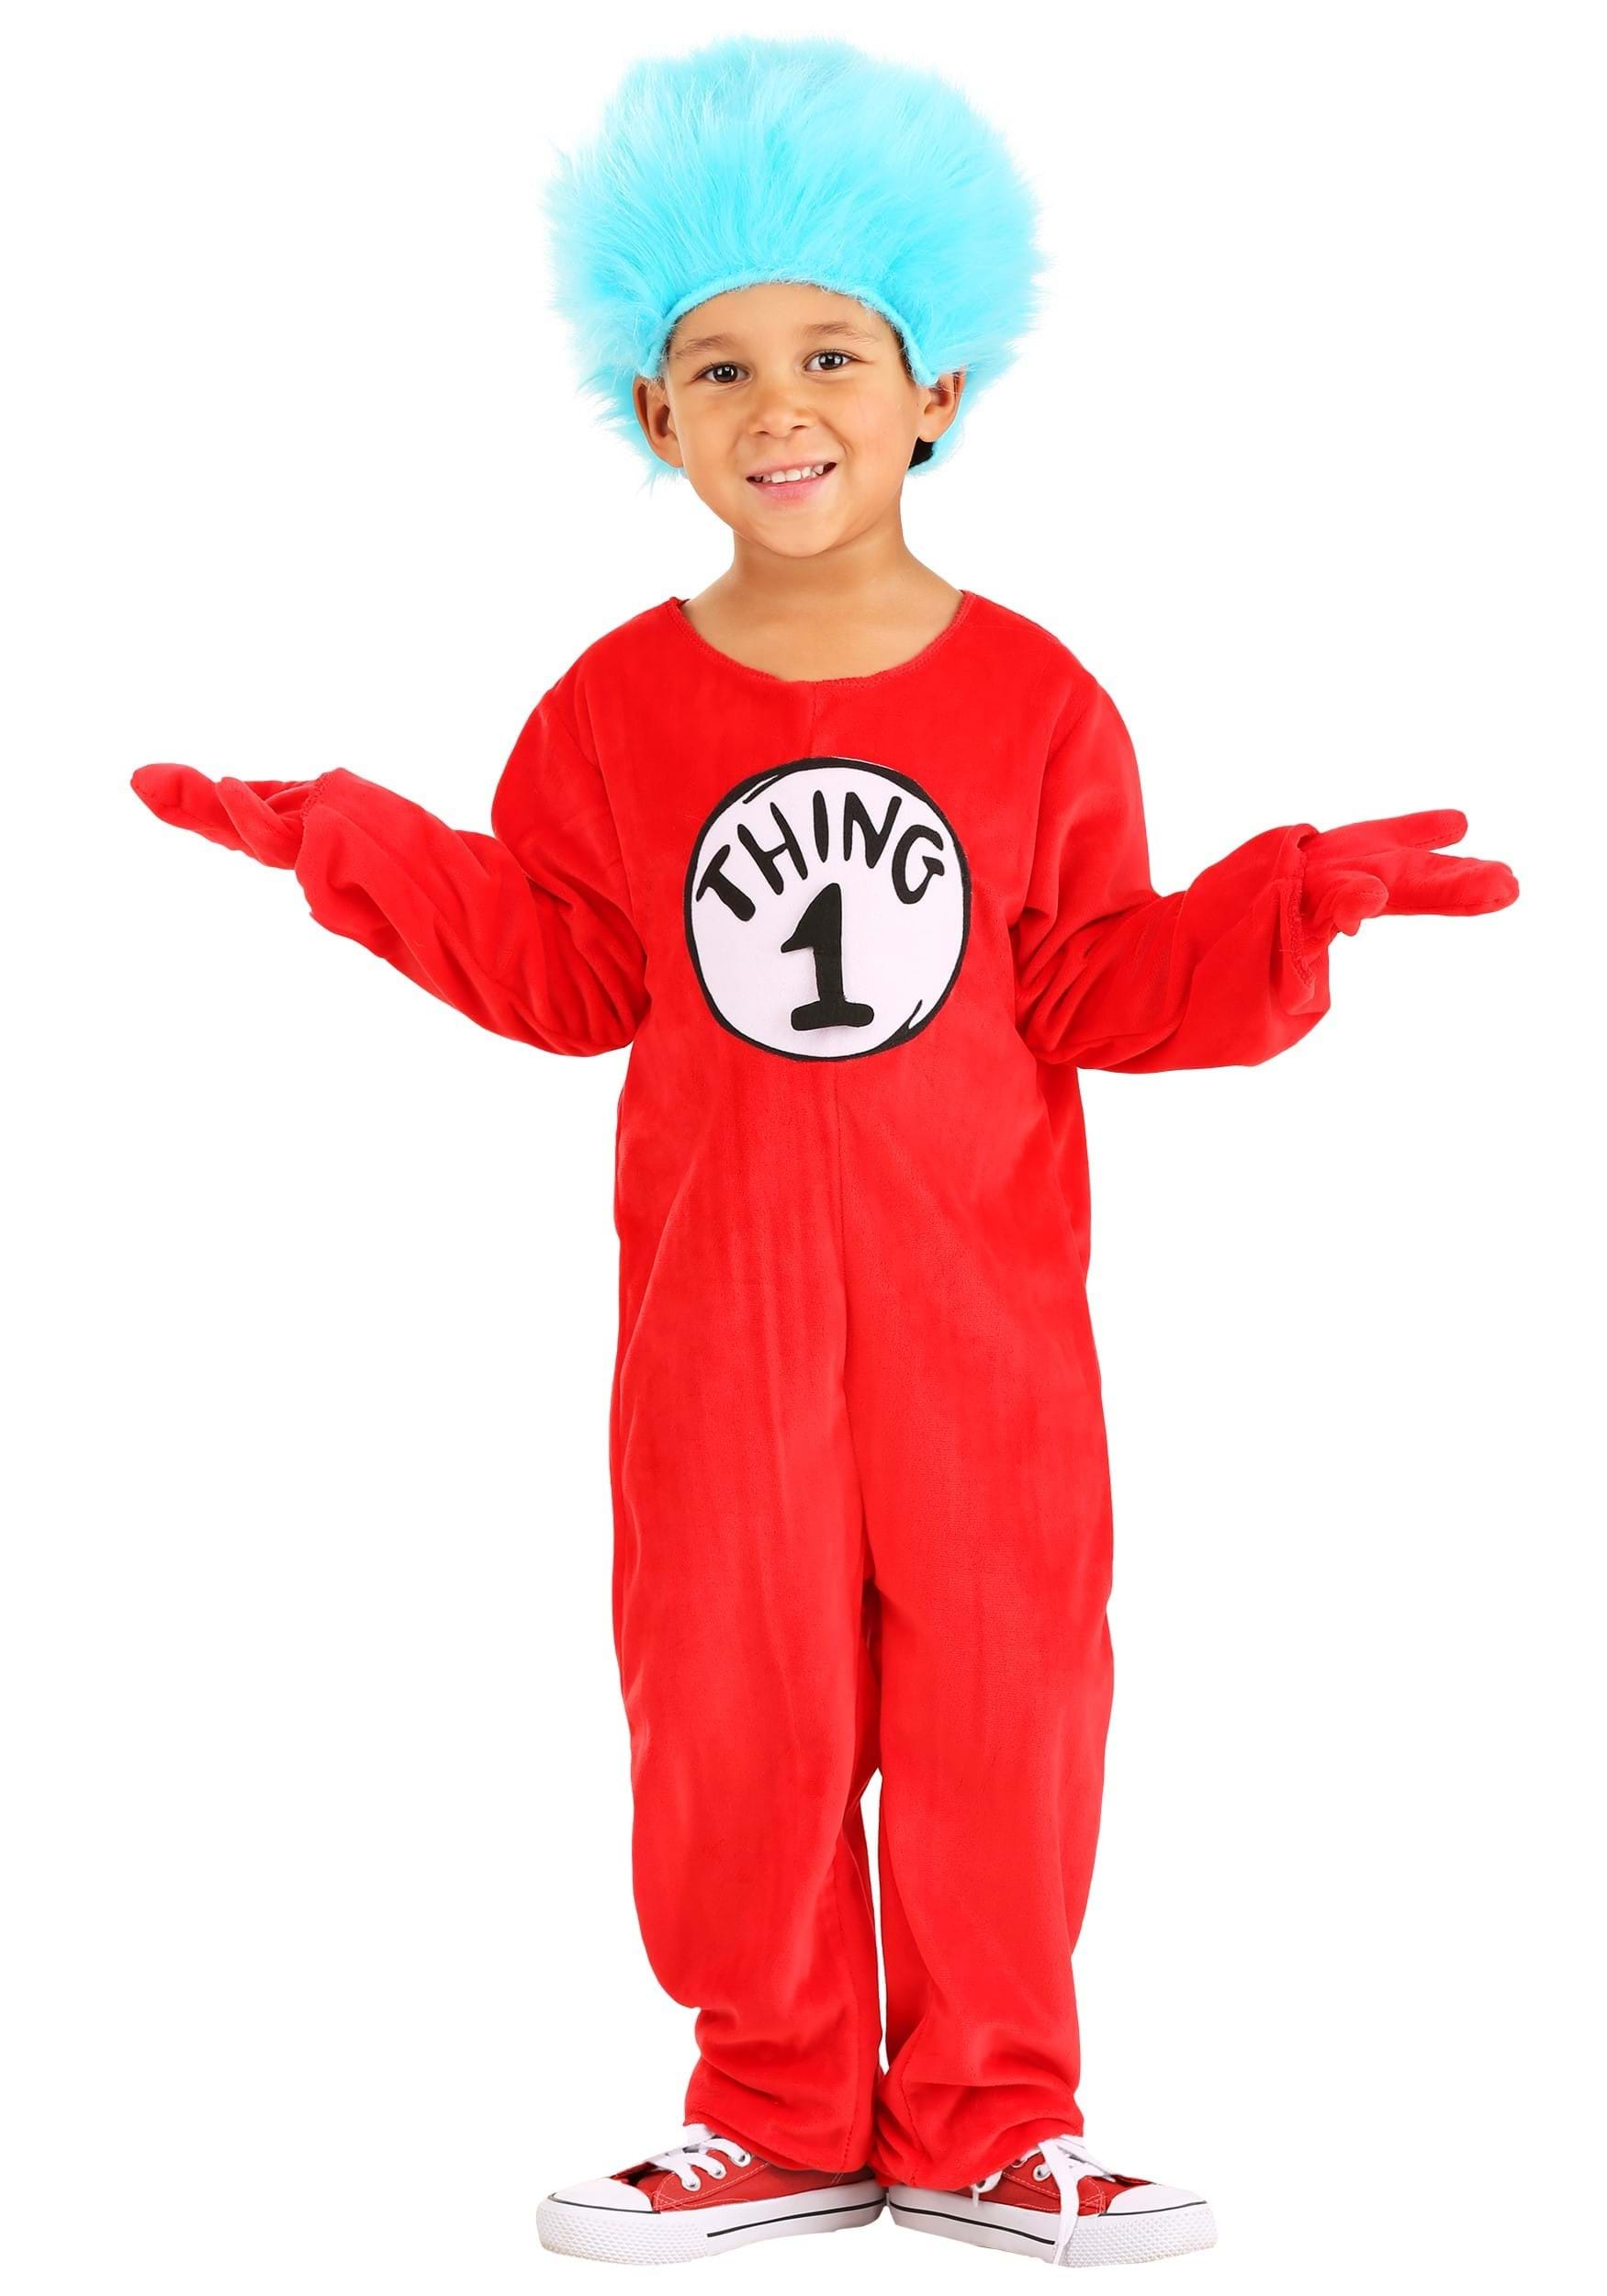 Photos - Fancy Dress Deluxe FUN Costumes Thing 1&2  Toddler Costume Red/Blue/White EL400 